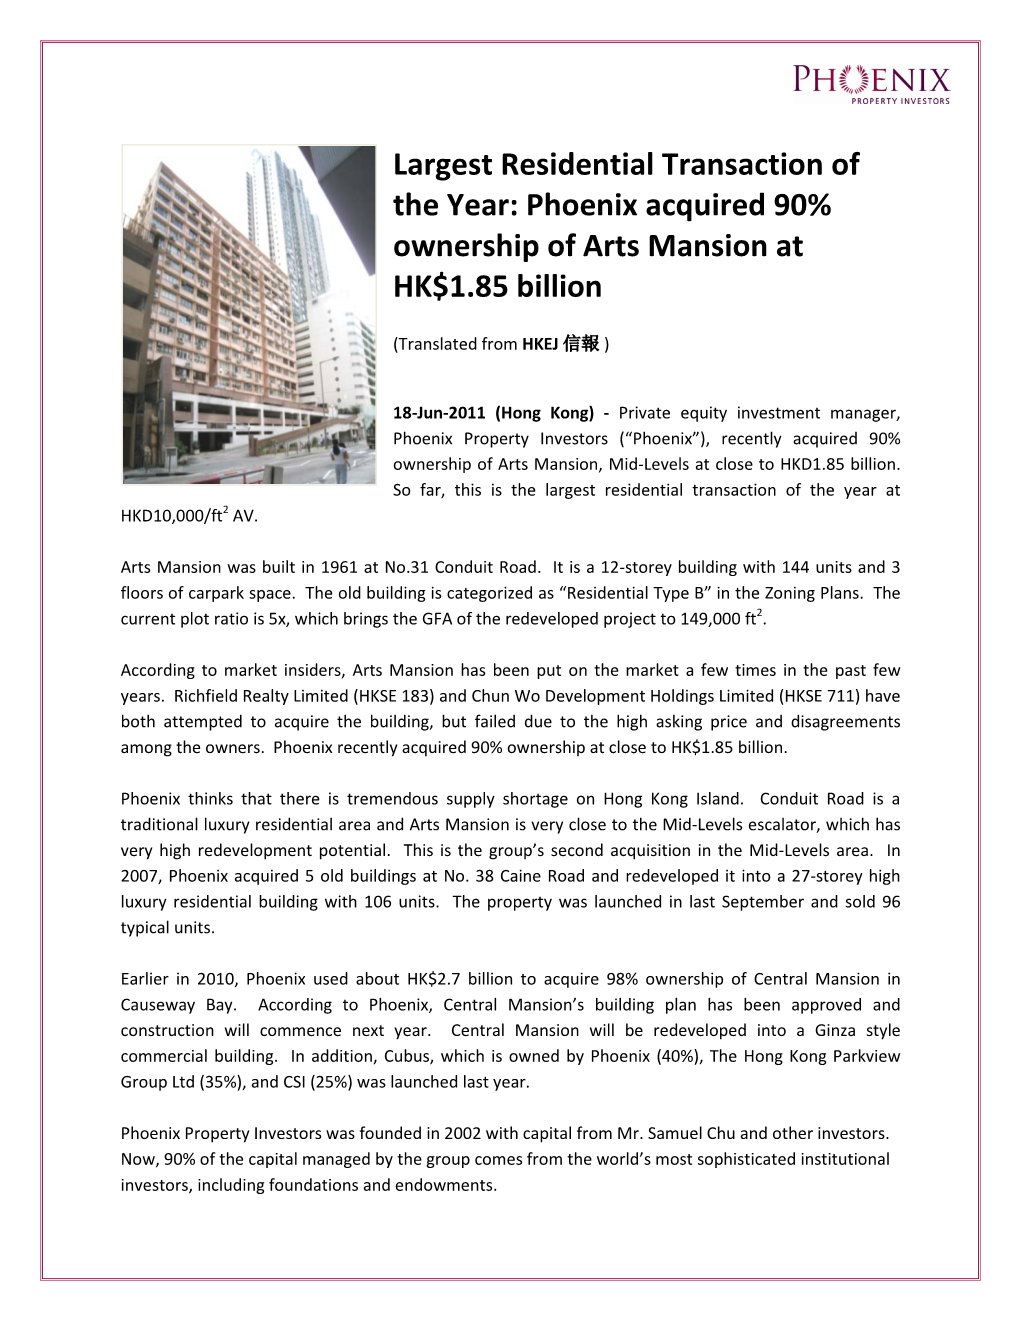 18 Jun 2011 HKEJ – Largest Residential Transaction of the Year